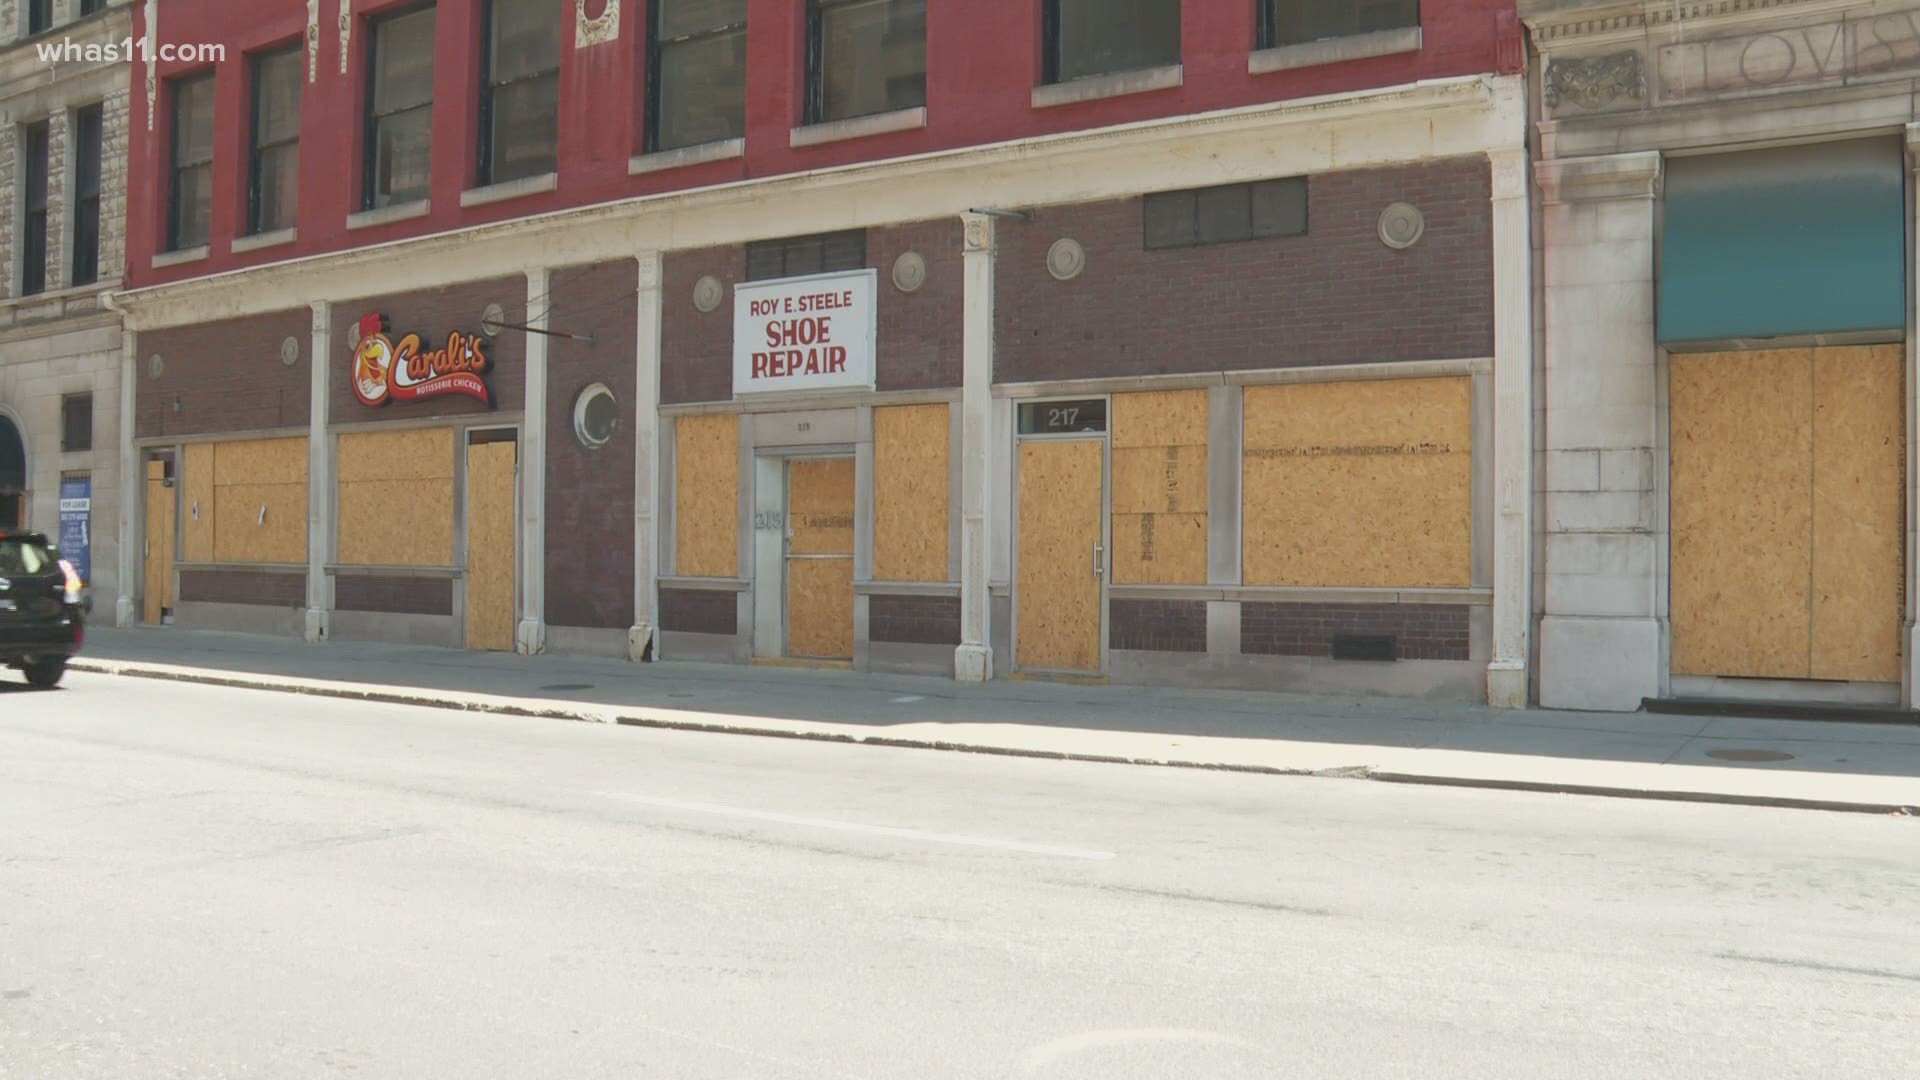 Boarded up windows aren't hard to find in downtown Louisville, but customers are. Business owners say that is their biggest challenge.